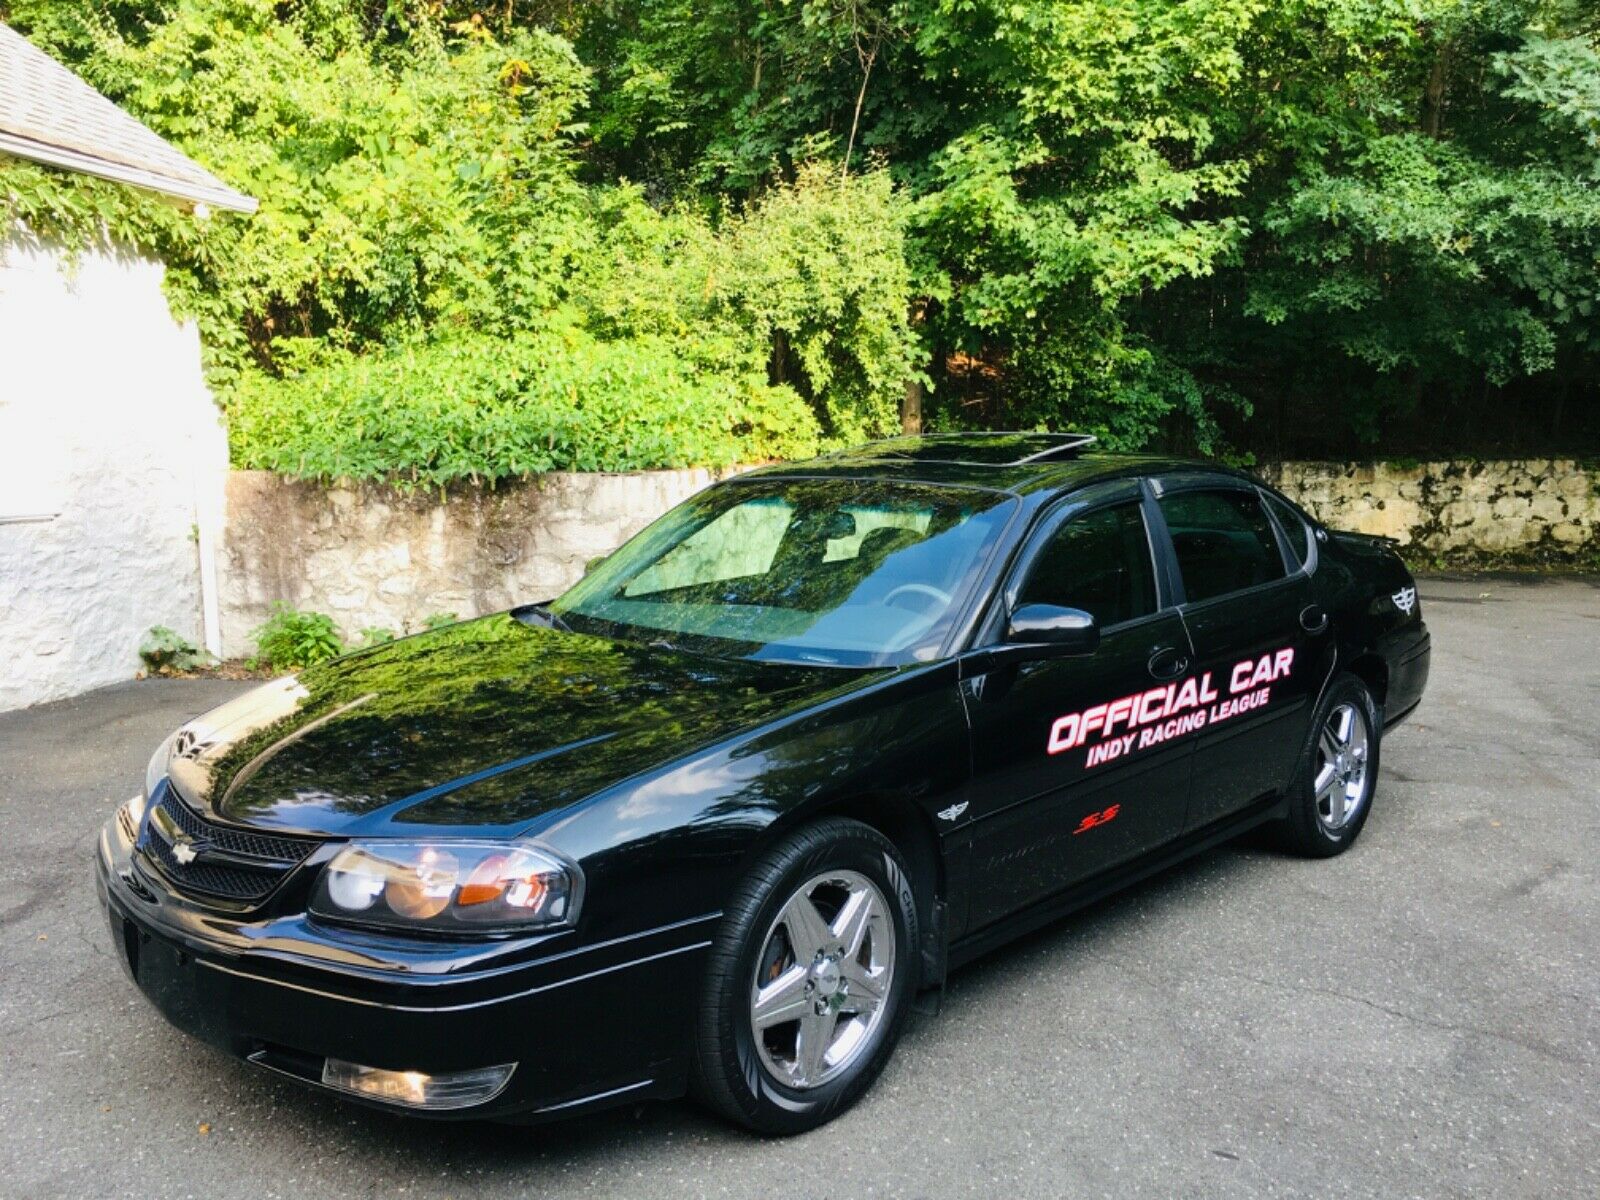 2004 Chevrolet Impala Ss Impala Supercharged Pace Car Indy 500 No Reserv 2004 Chevy Impala Ss Supercharged Indy 500 Indianapolis Official Pace Car Limite